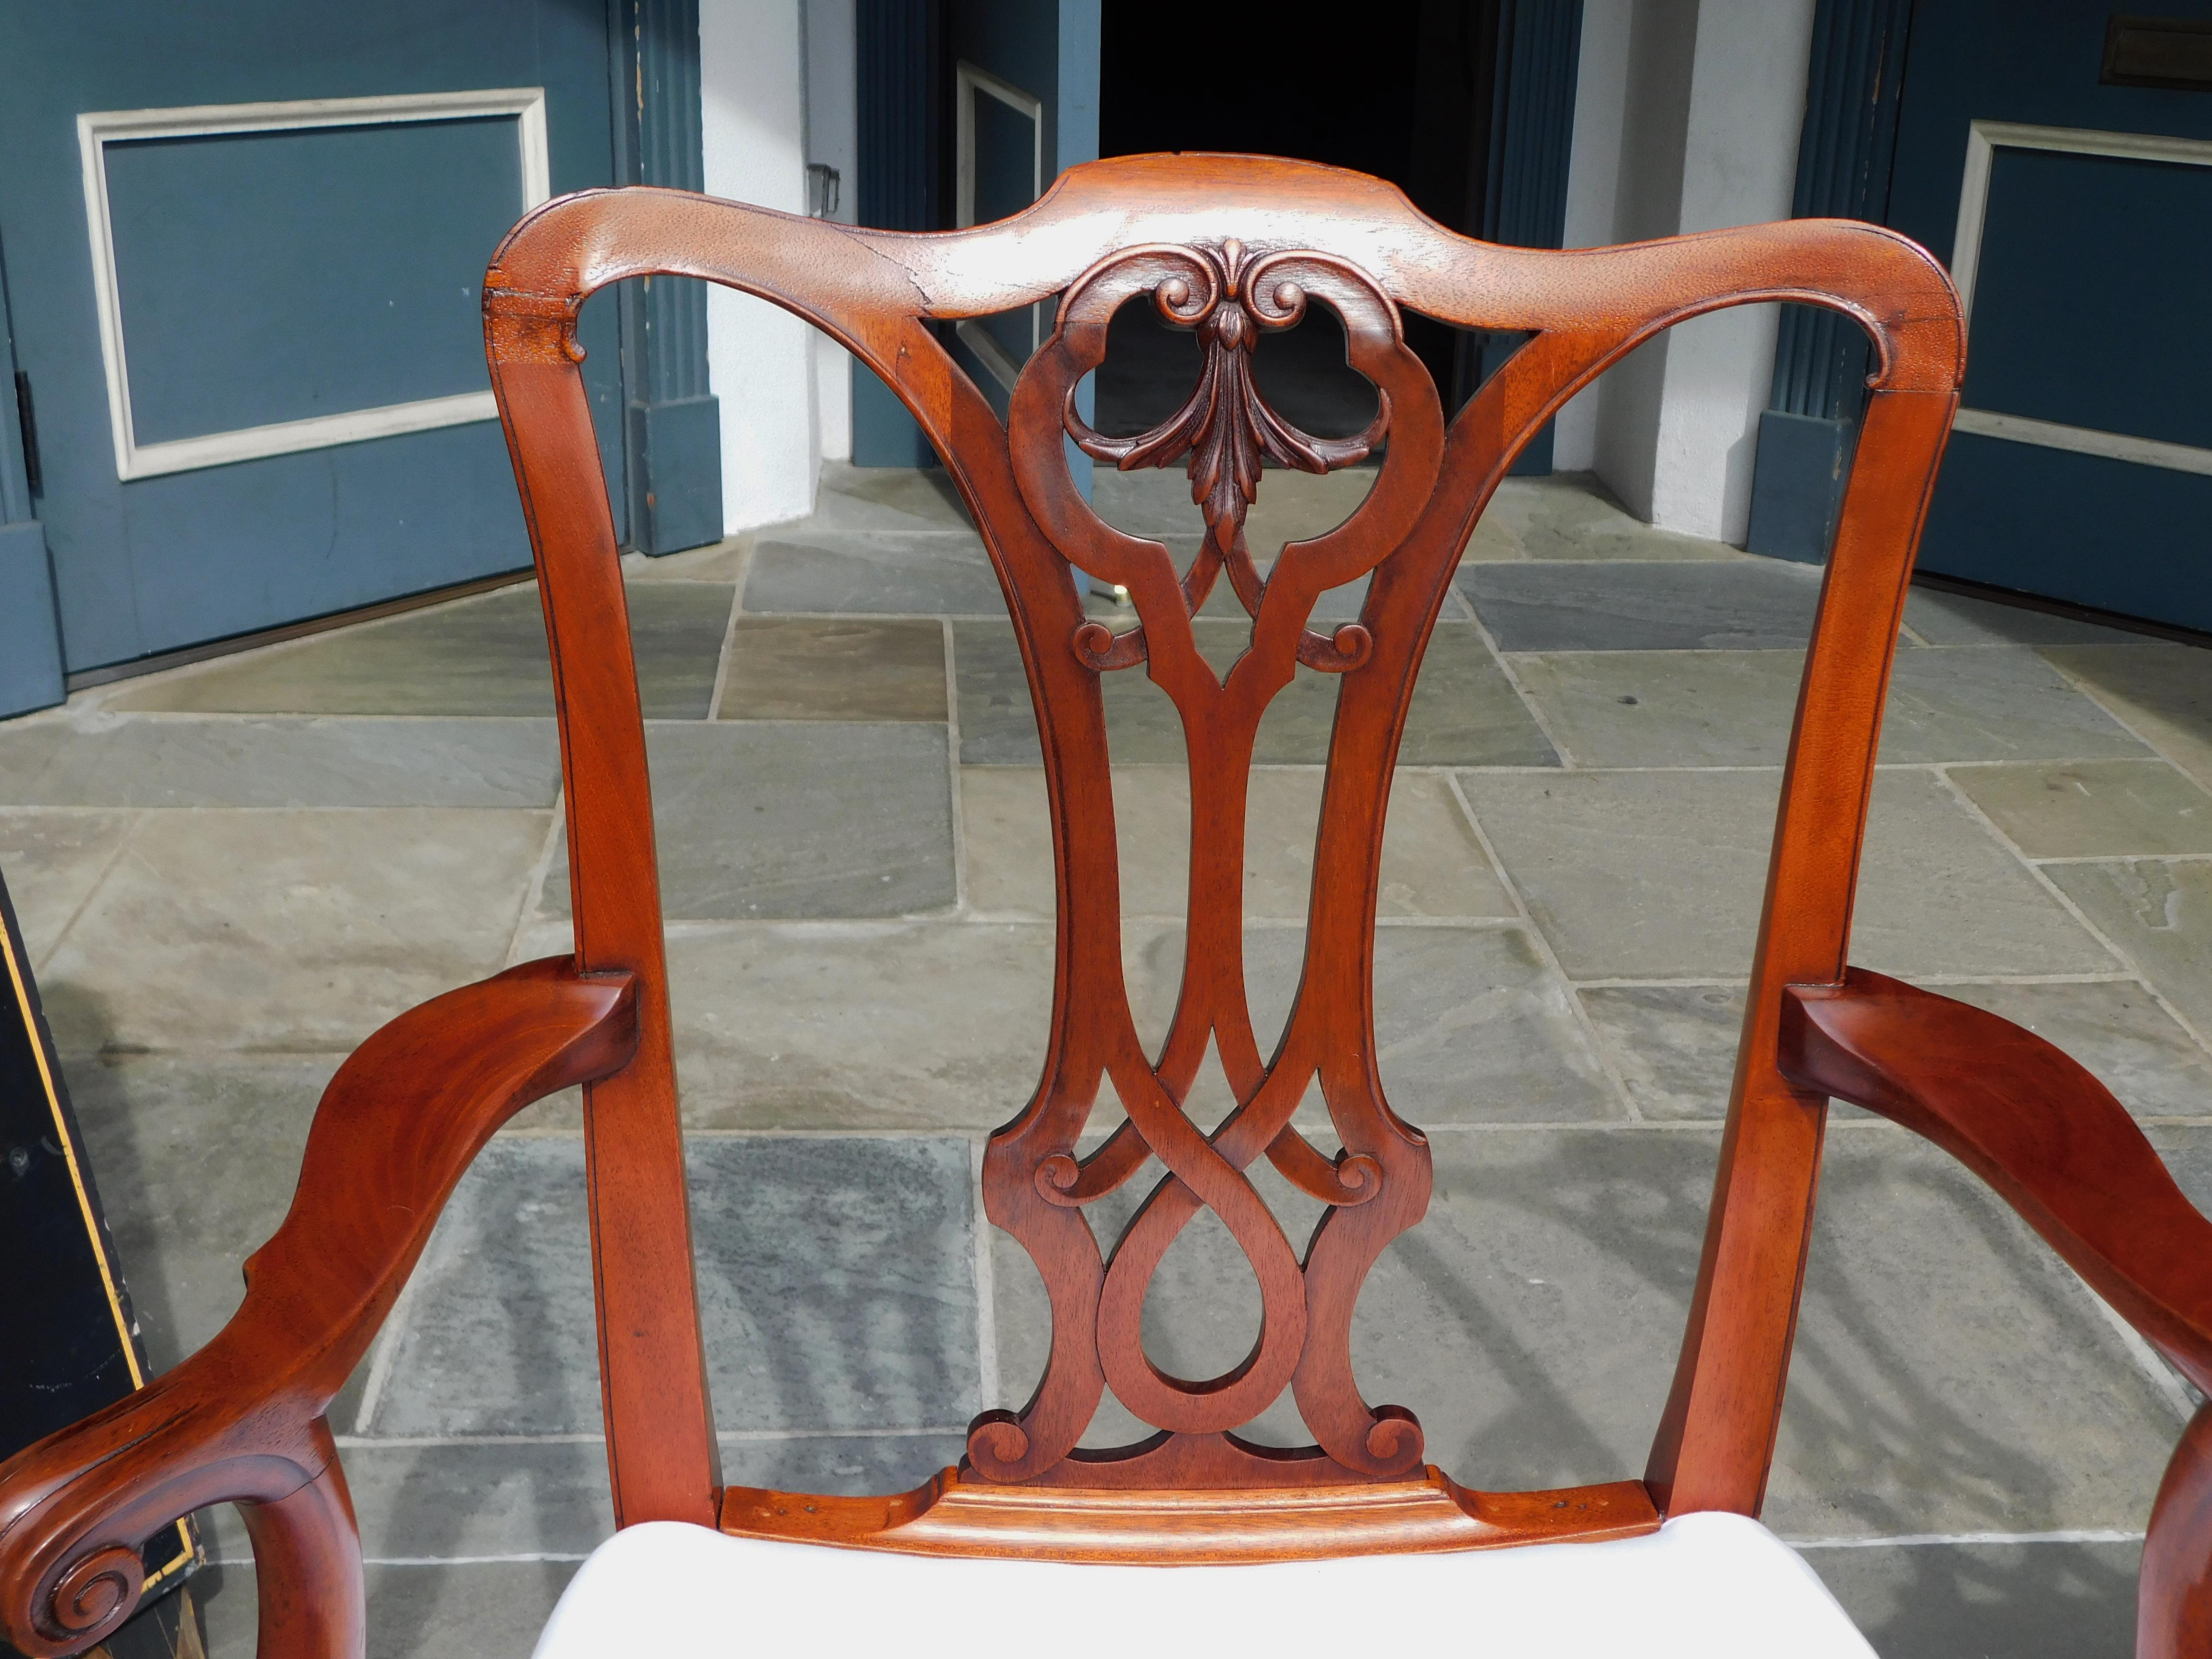 Muslin Pair of English Mahogany Serpentine Crest Arm Chairs with Saddle Seats, C. 1820 For Sale